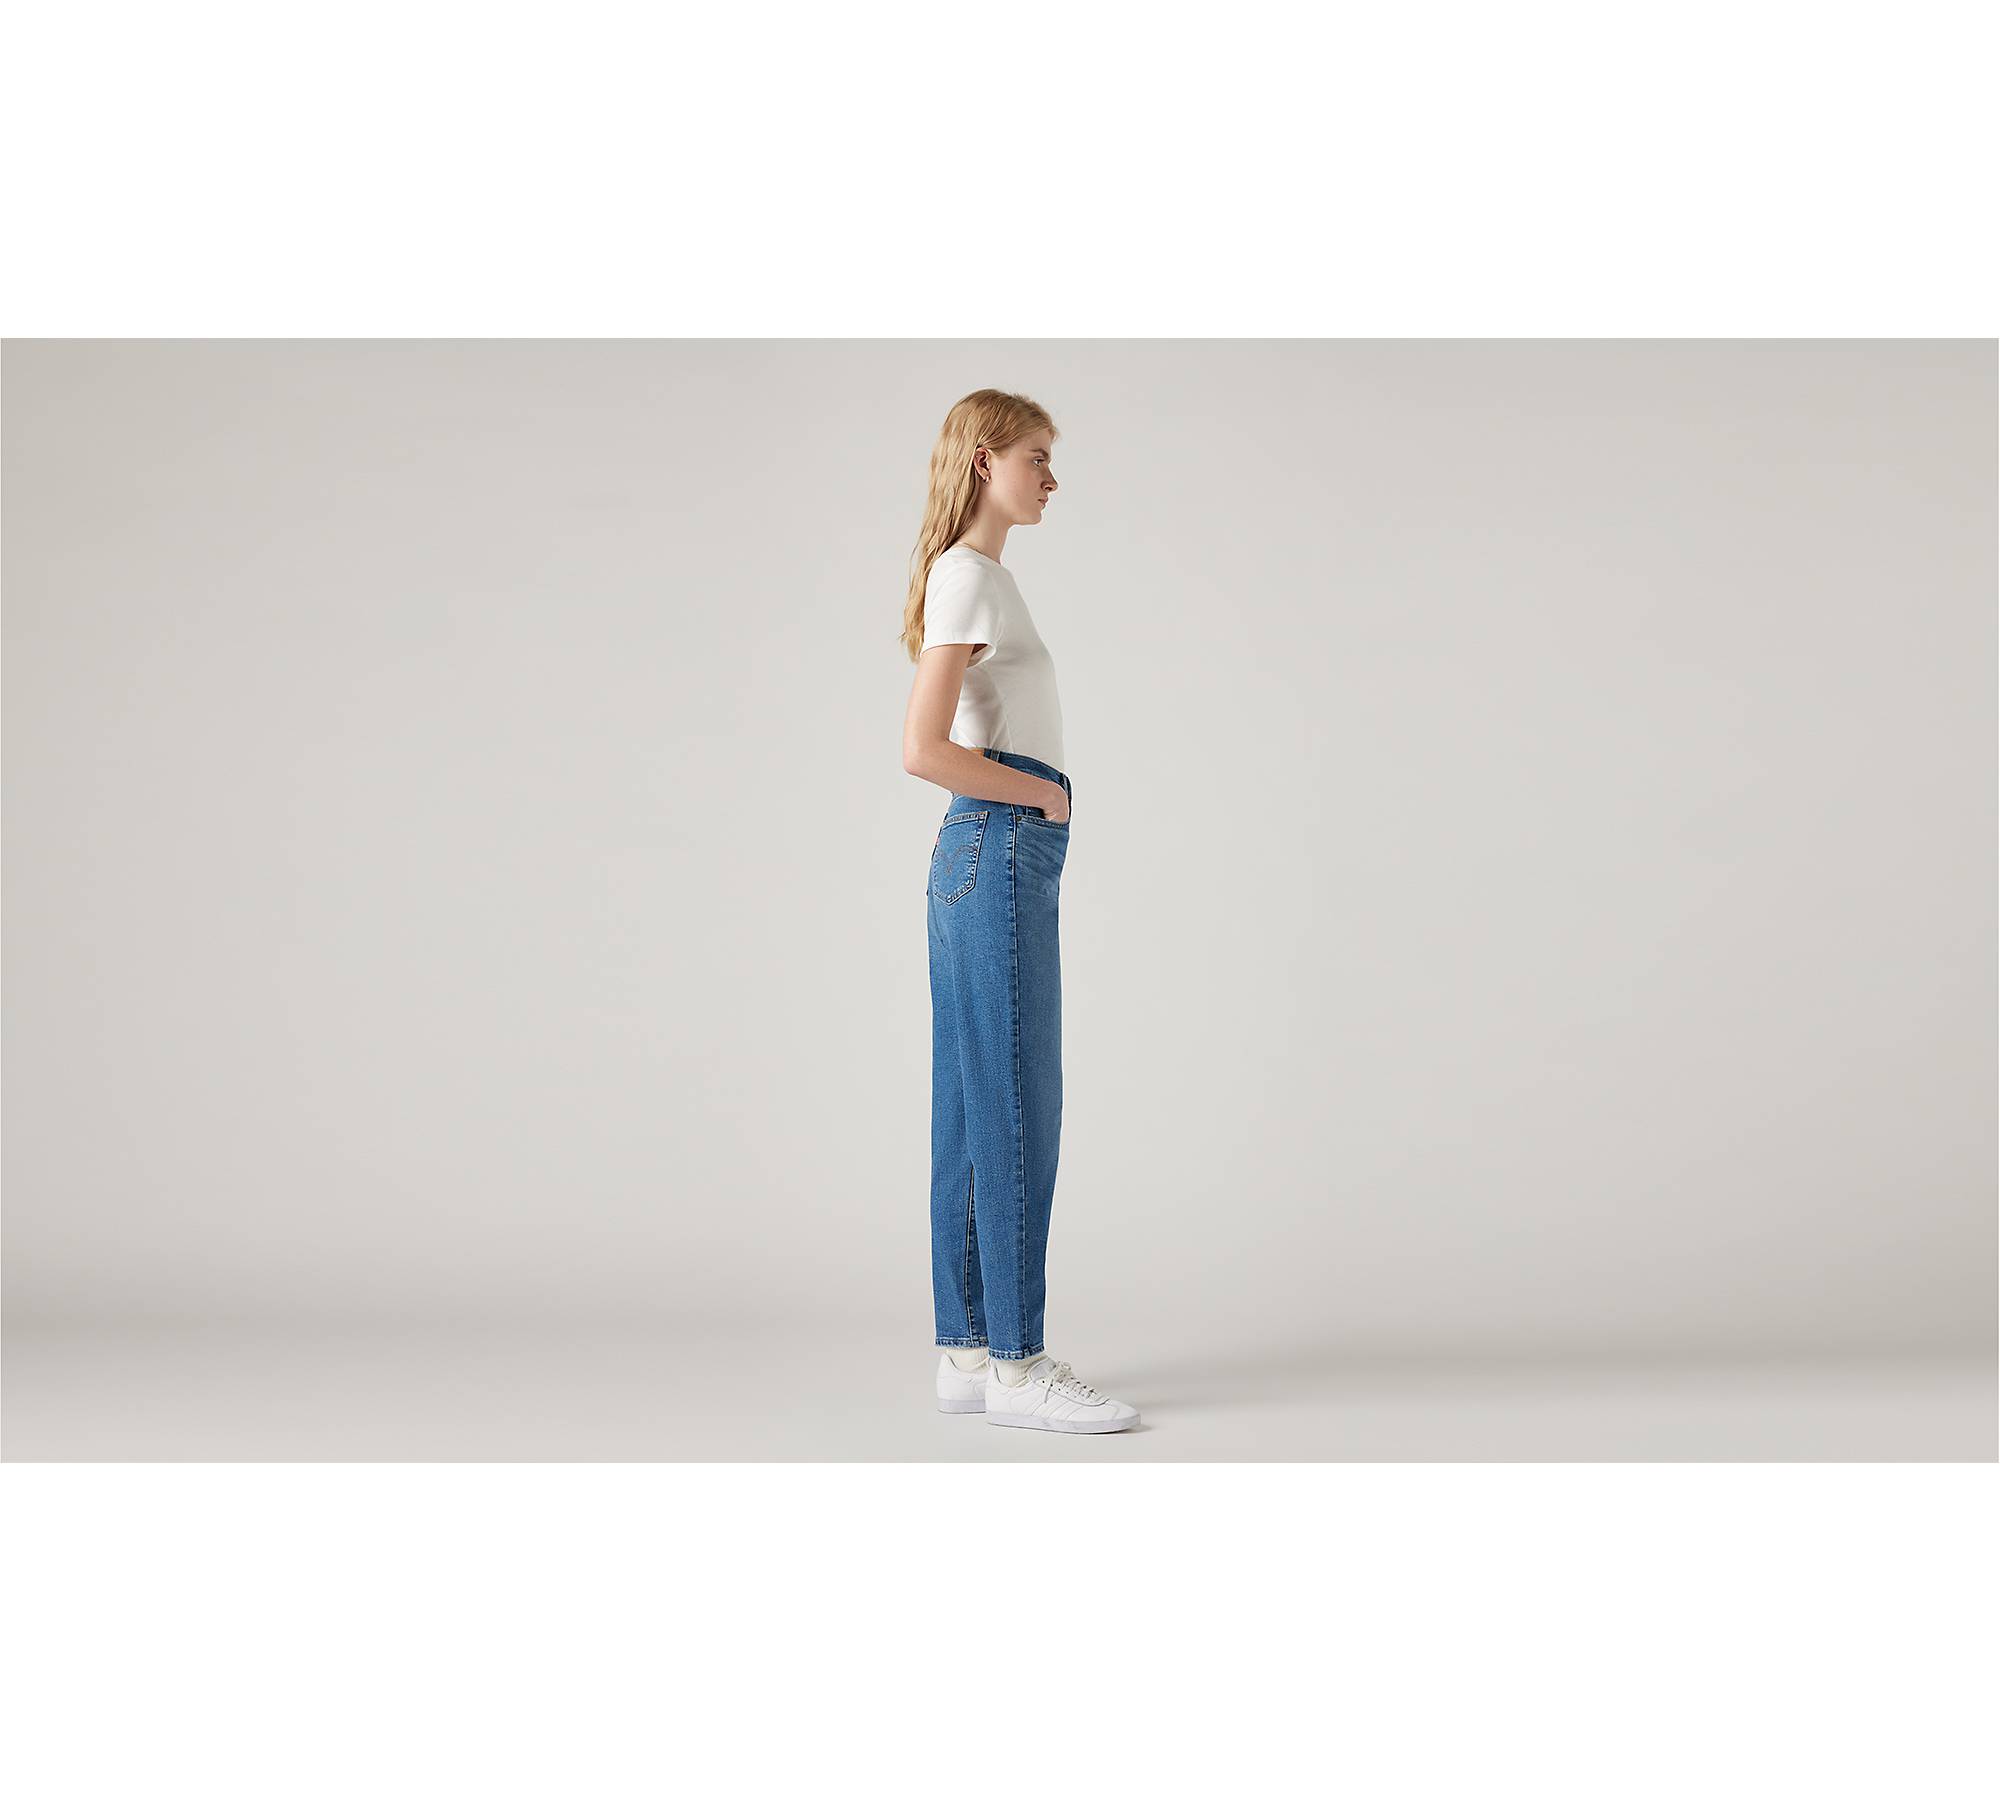 6 Best And Popular Mom Jeans Styles  Mom jeans style, Mom jeans outfit, Mom  jeans